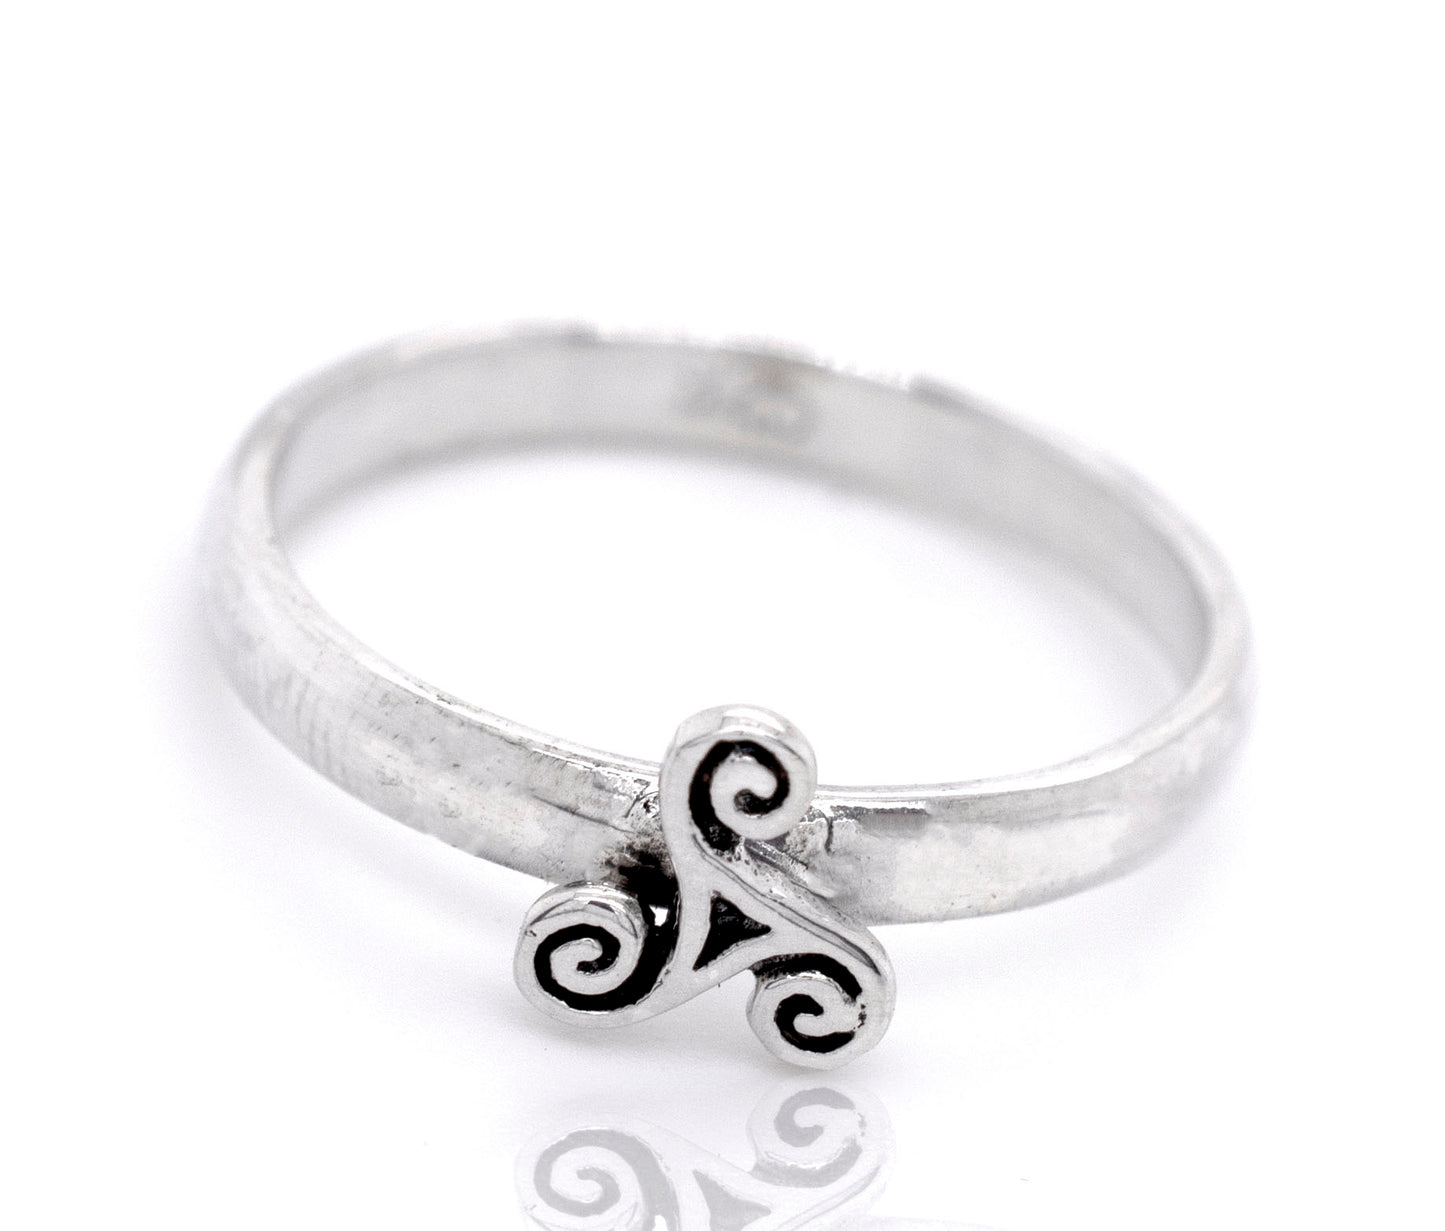 An intricately designed Dainty Triskelion Ring made of sterling silver.